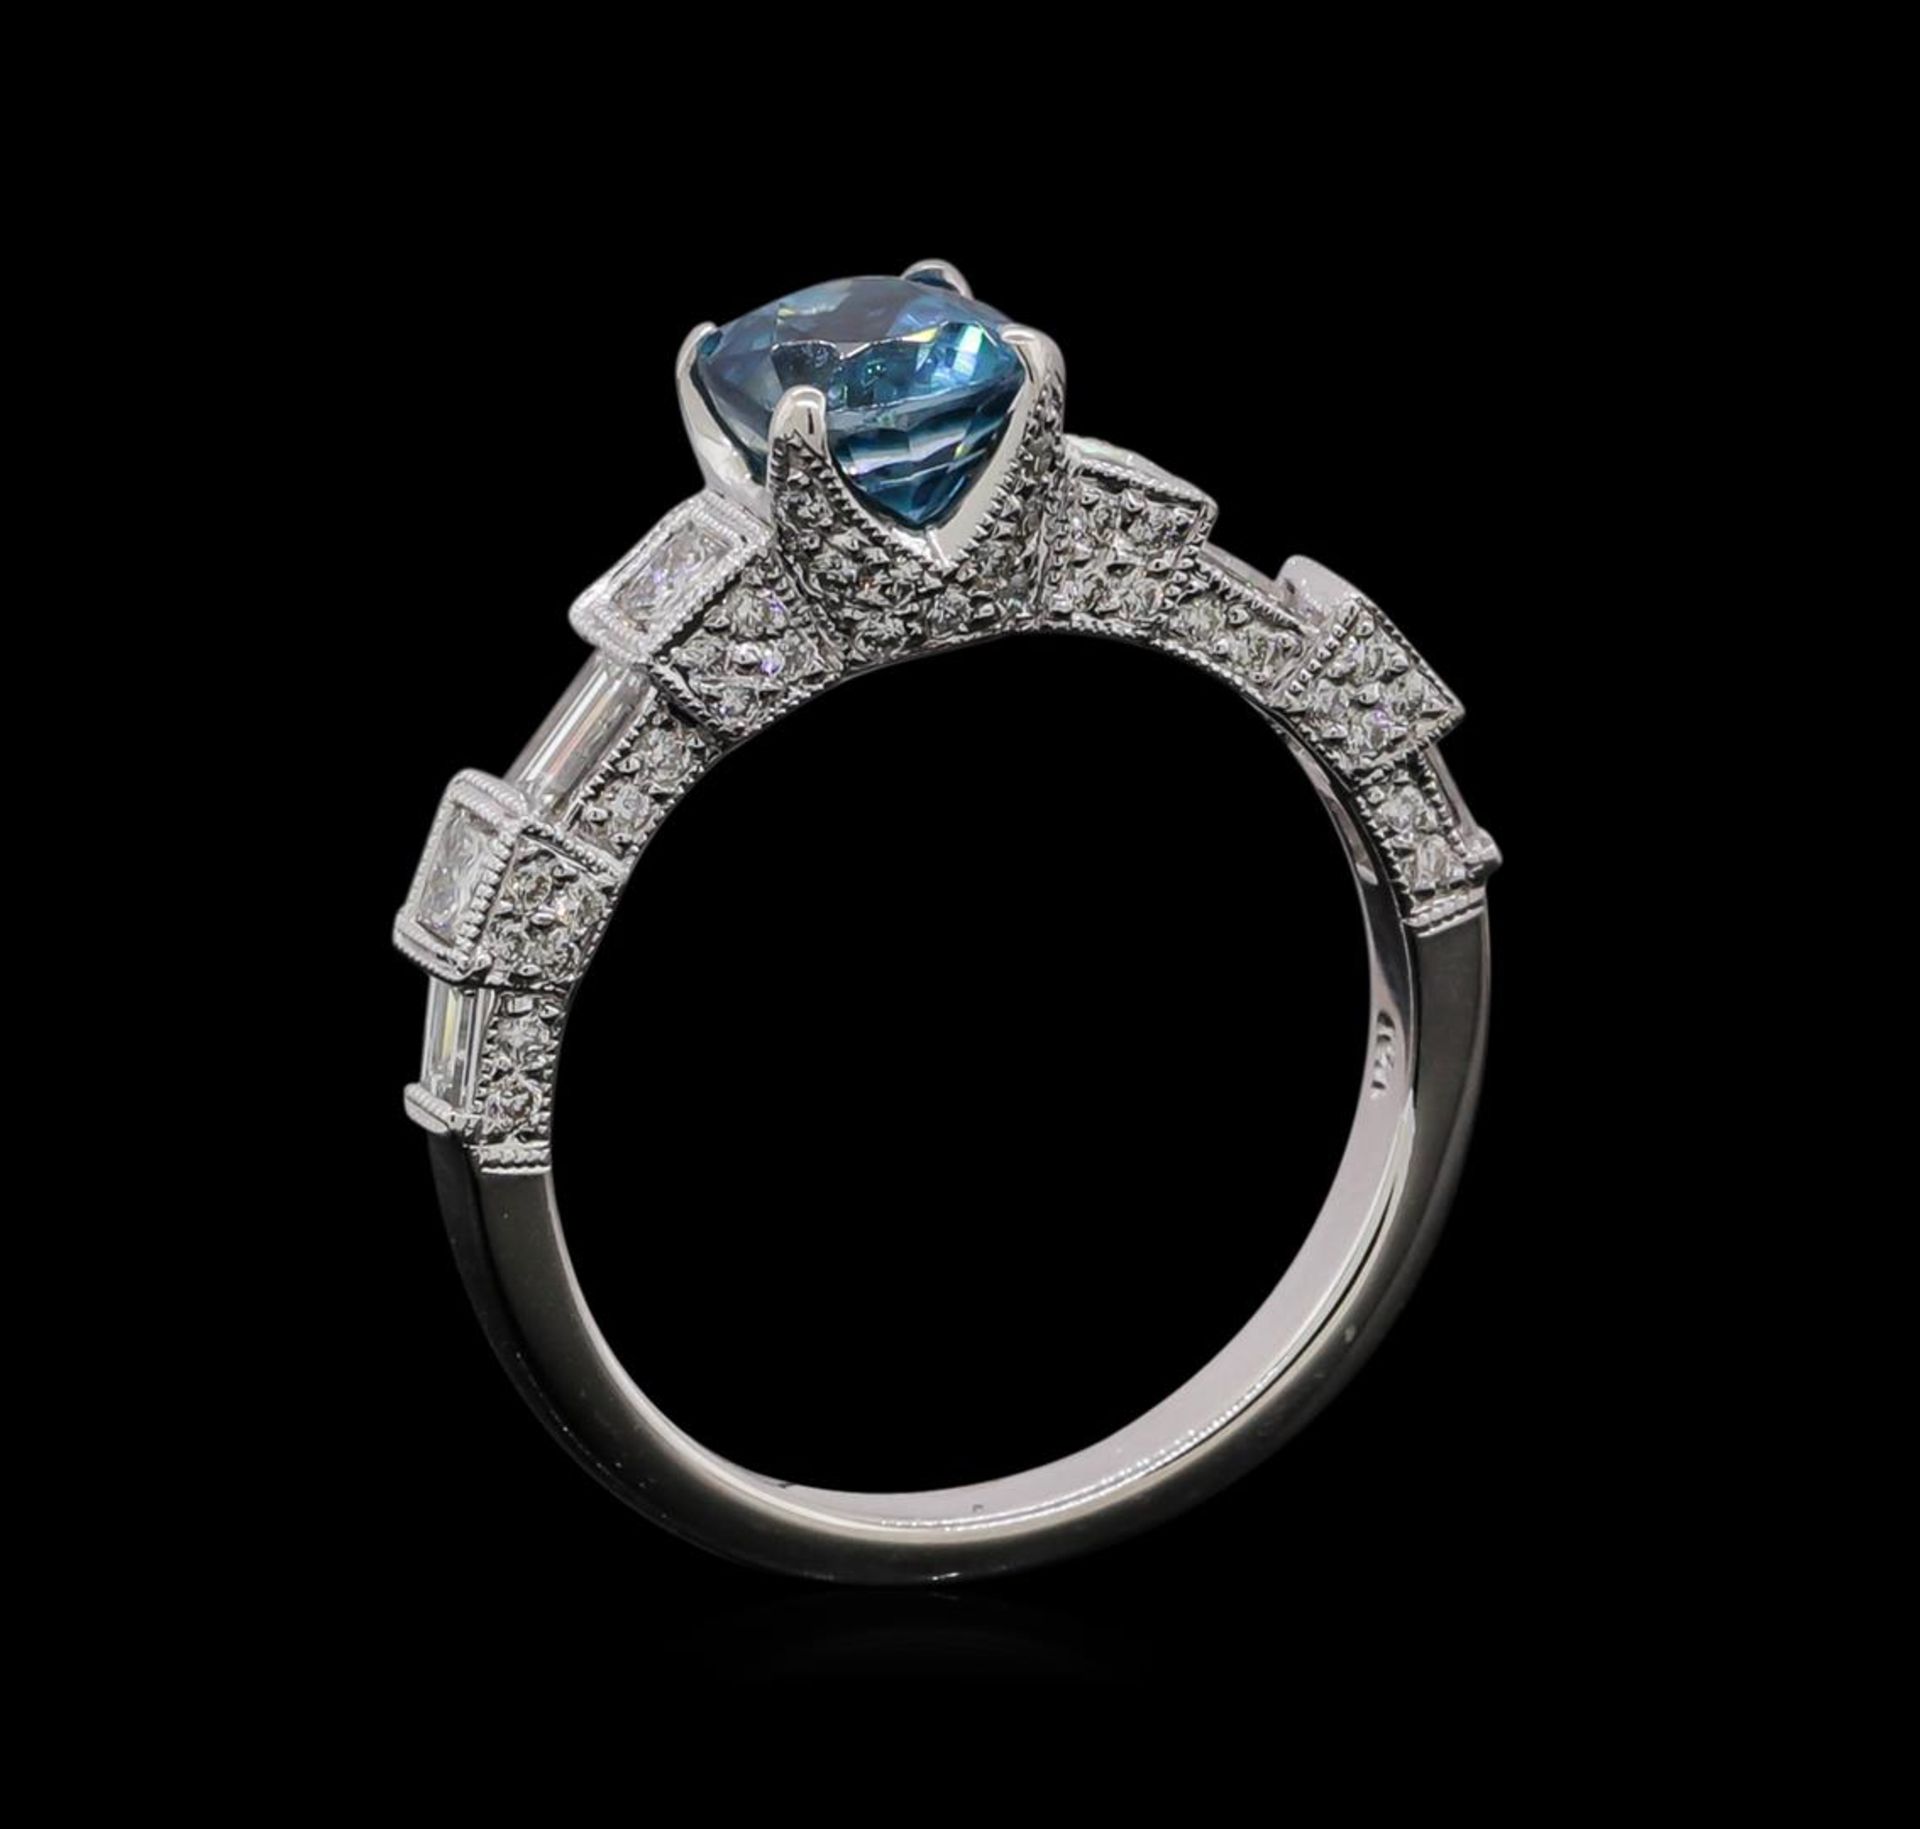 1.92 ctw Blue Zircon and Diamond Ring - 18KT White Gold - Image 4 of 5